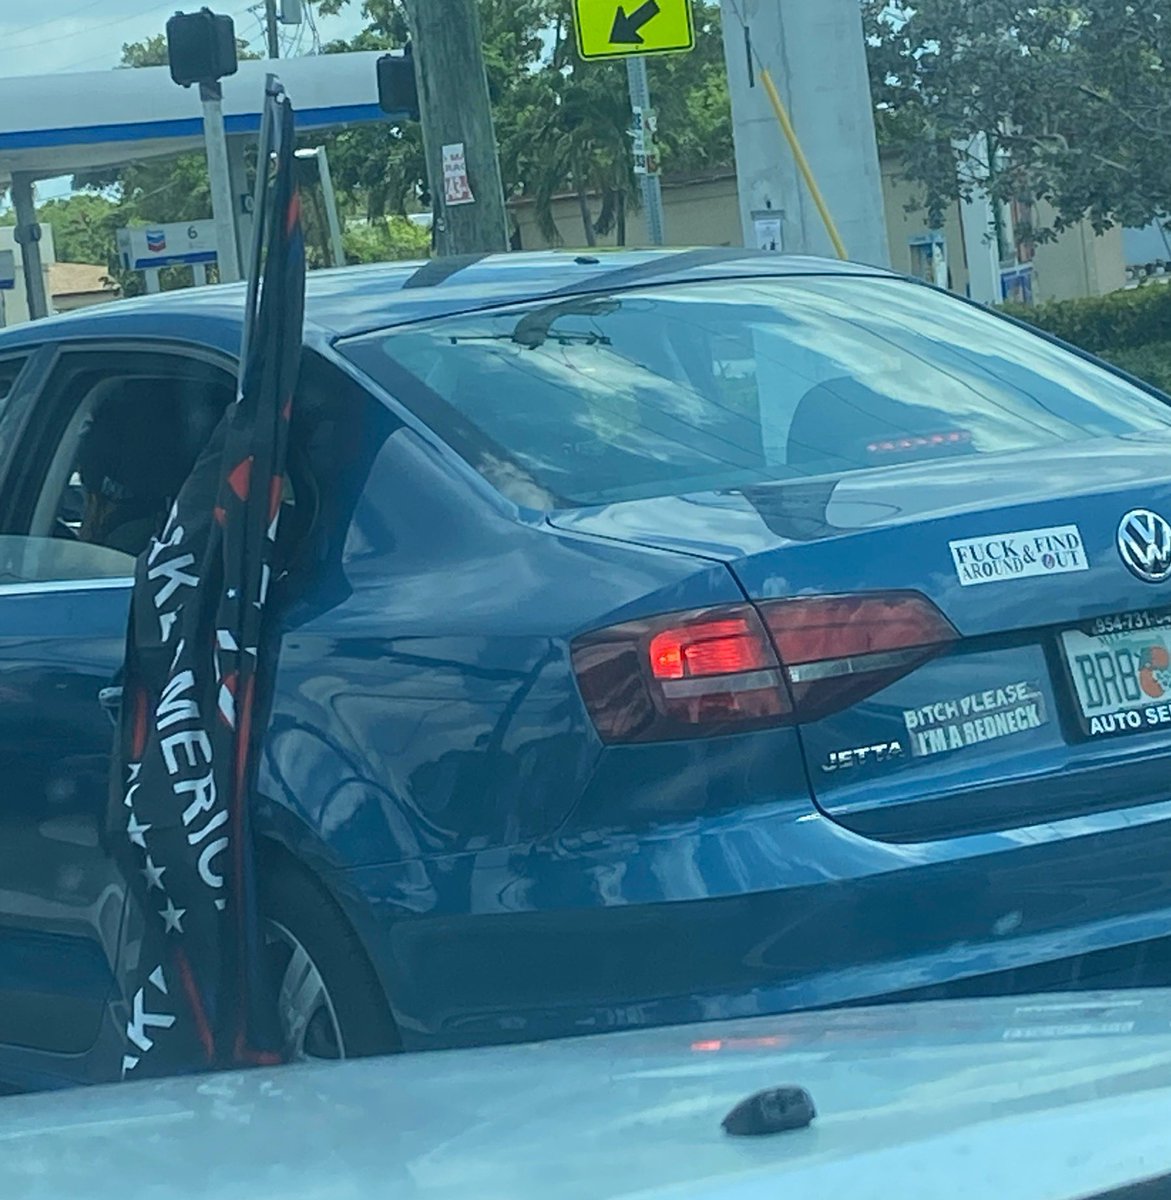 A black man with trump garb all over his car in Broward county. Imagine that. Churches are conning people into Trump for their own #TaxCuts.

#TaxTheChurches

Had to edit out his full license plate but there are two HUHE Trump stickers on other side. 🙄 #BLM #BlackLivesMatter